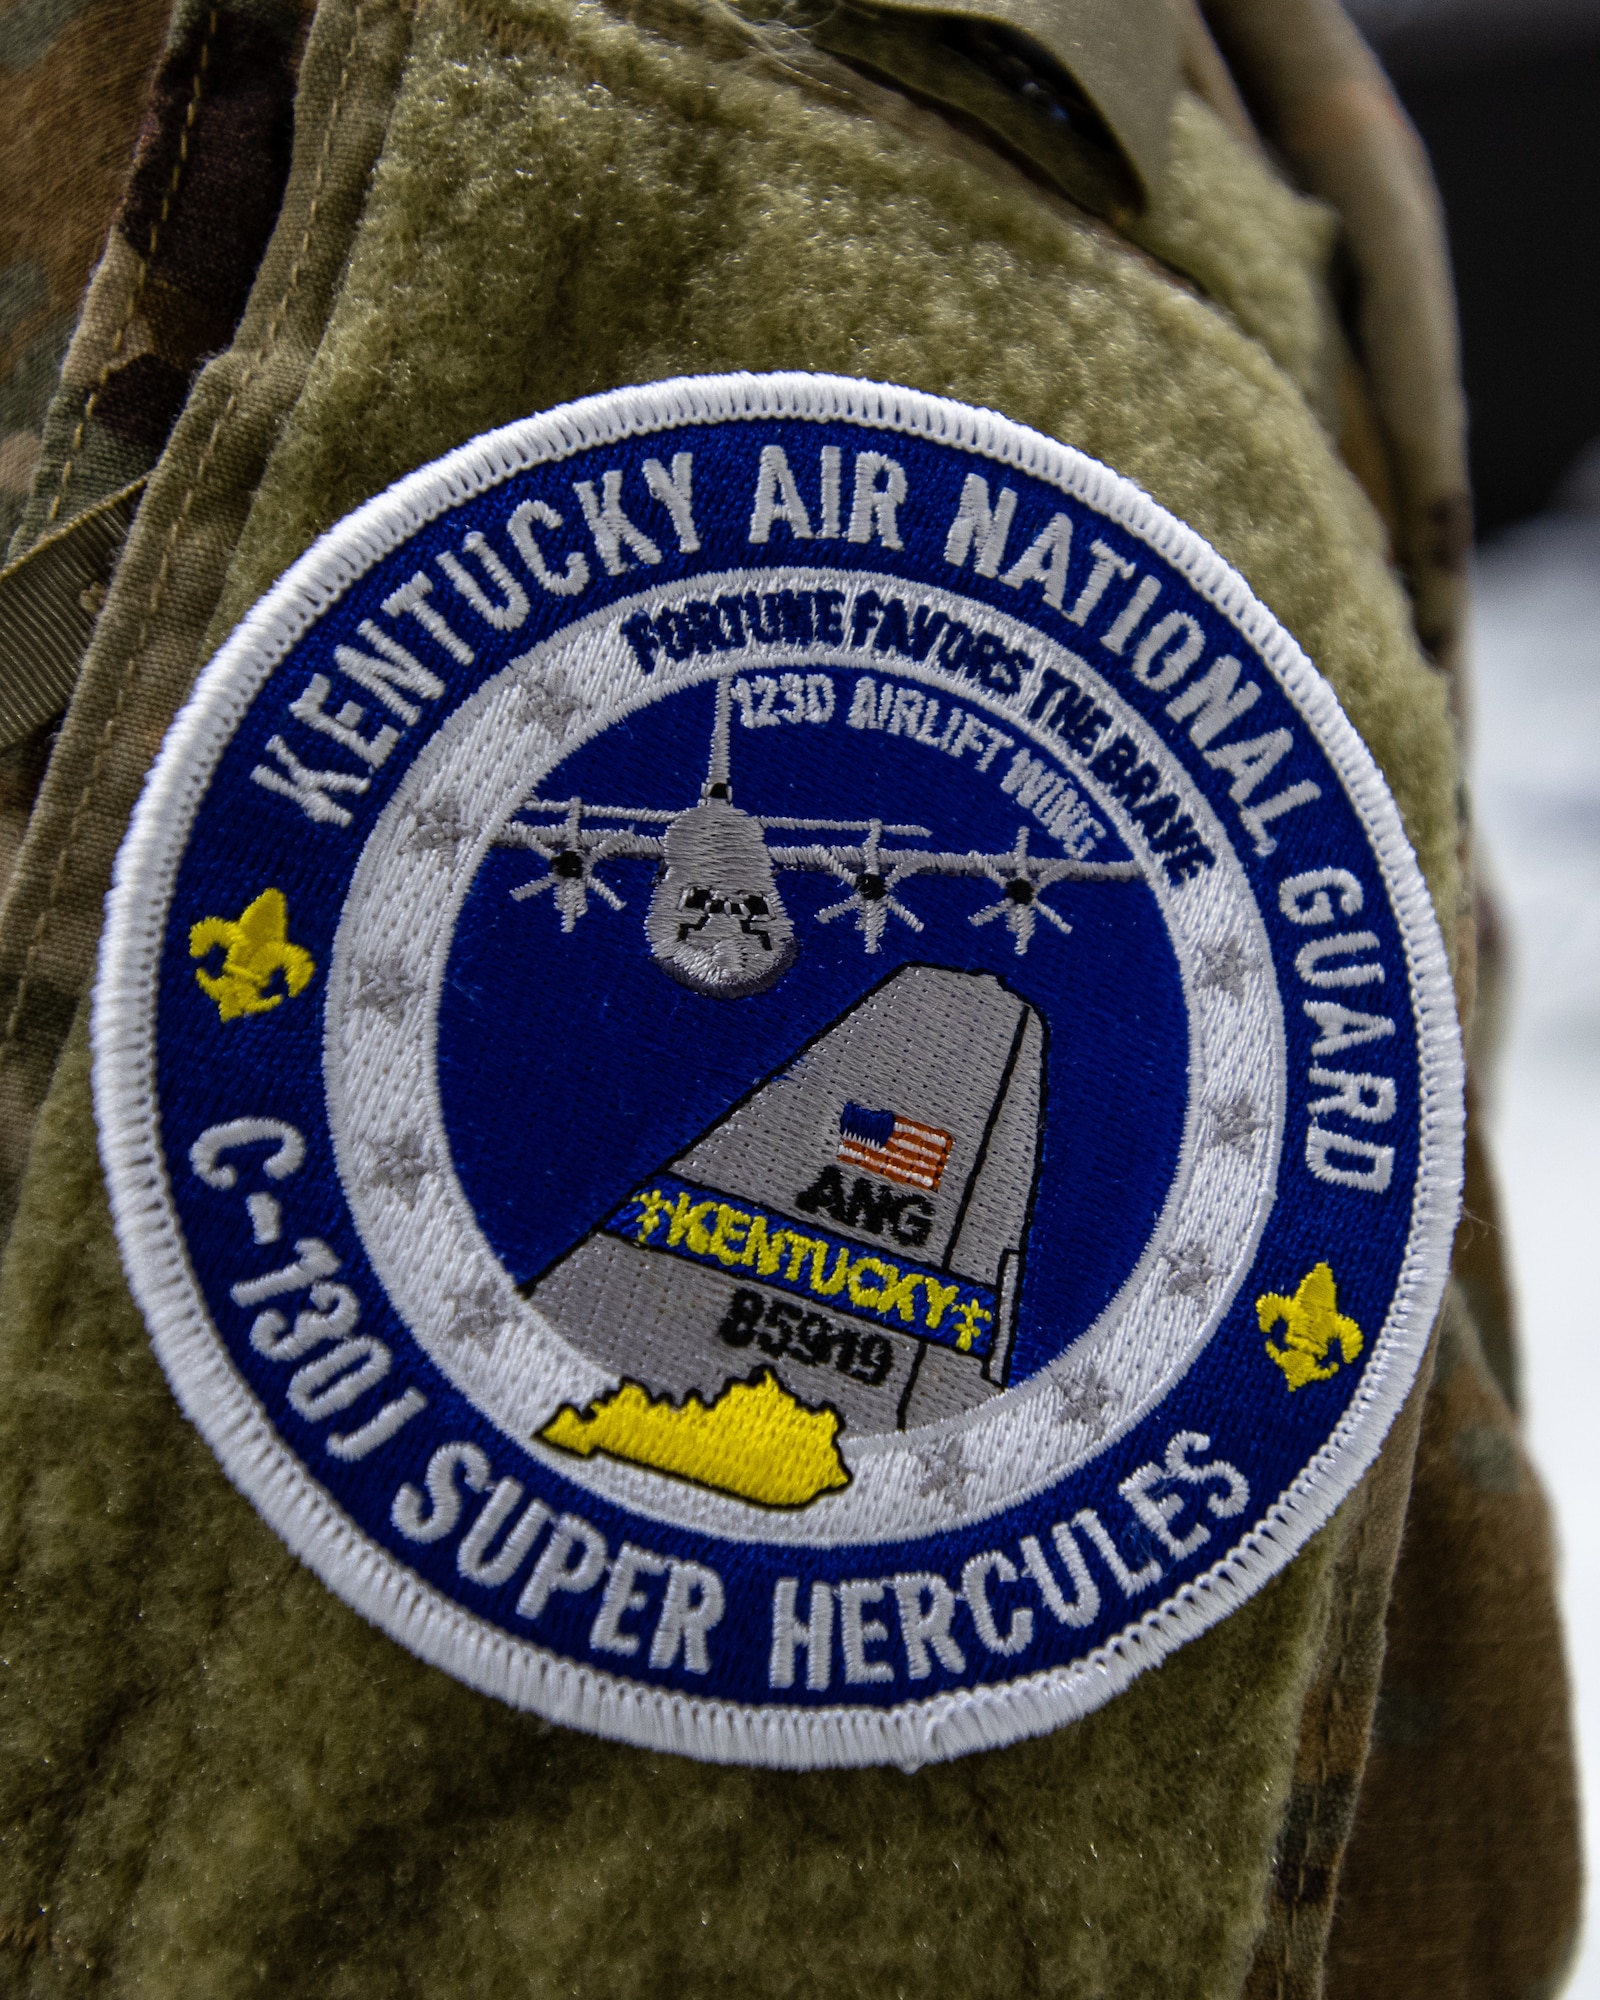 A distinctive patch commemorates the arrival of two new C-130J Super Hercules aircraft at the Kentucky Air National Guard Base in Louisville, Ky., Nov. 6, 2021, ushering in a new era of aviation for the 123rd Airlift Wing. The state-of-the-art transports are among eight the wing will receive over the next 11 months to replace eight aging C-130 H-model aircraft, which entered service in 1992 and have seen duty all over the world. (U.S. Air National Guard photo by Dale Greer)